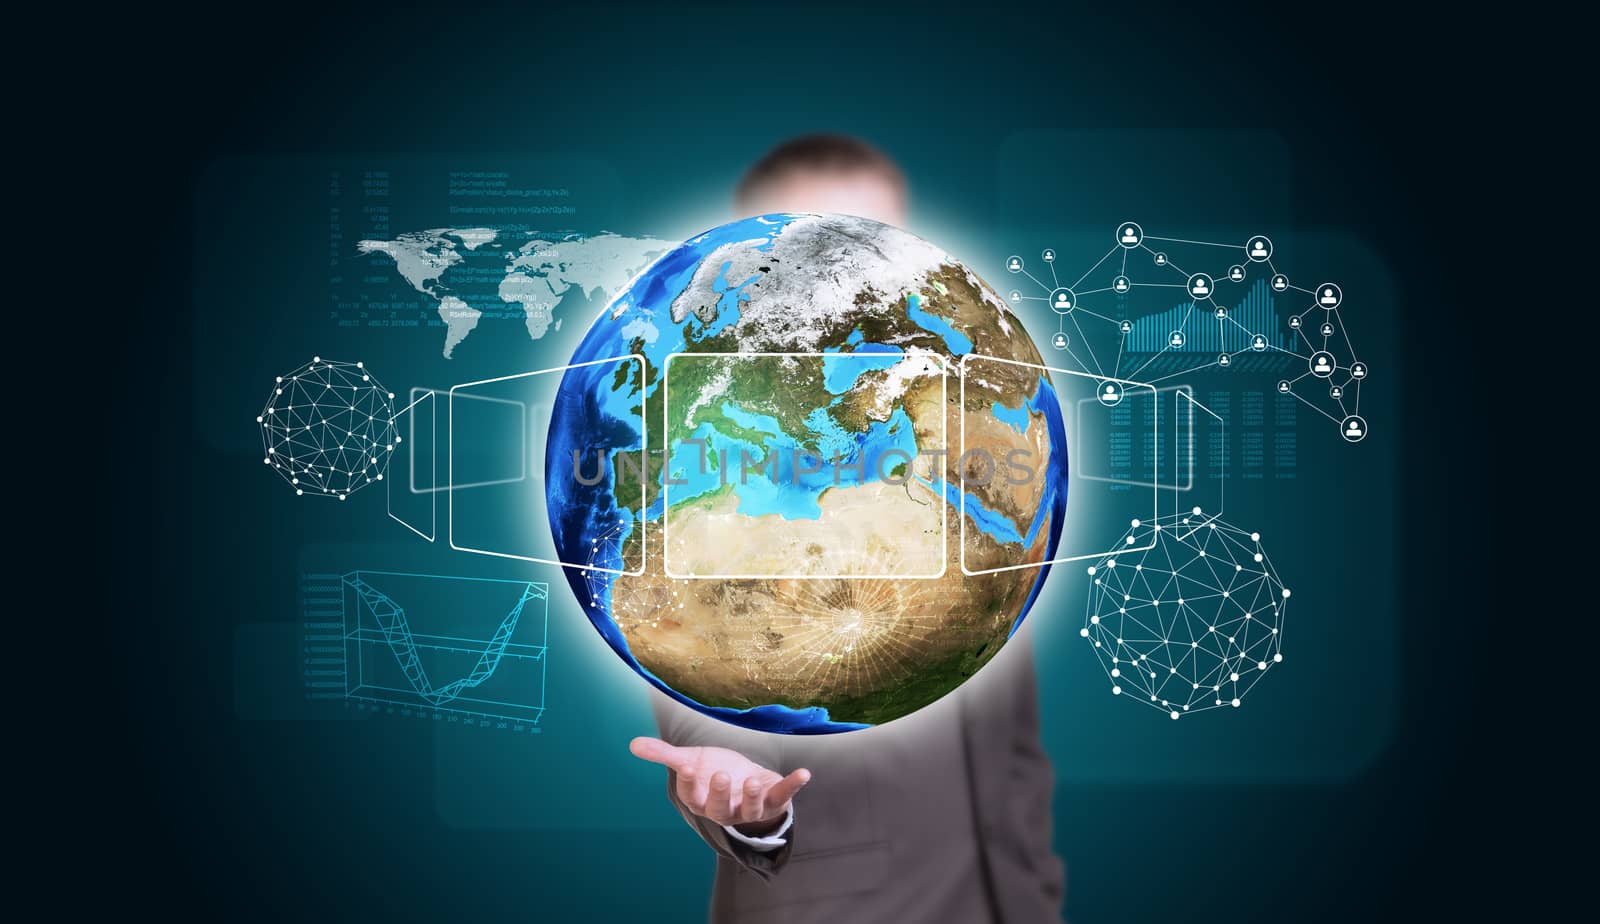 Businessman in suit hold Earth with graphs and network. Elements of this image are furnished by NASA